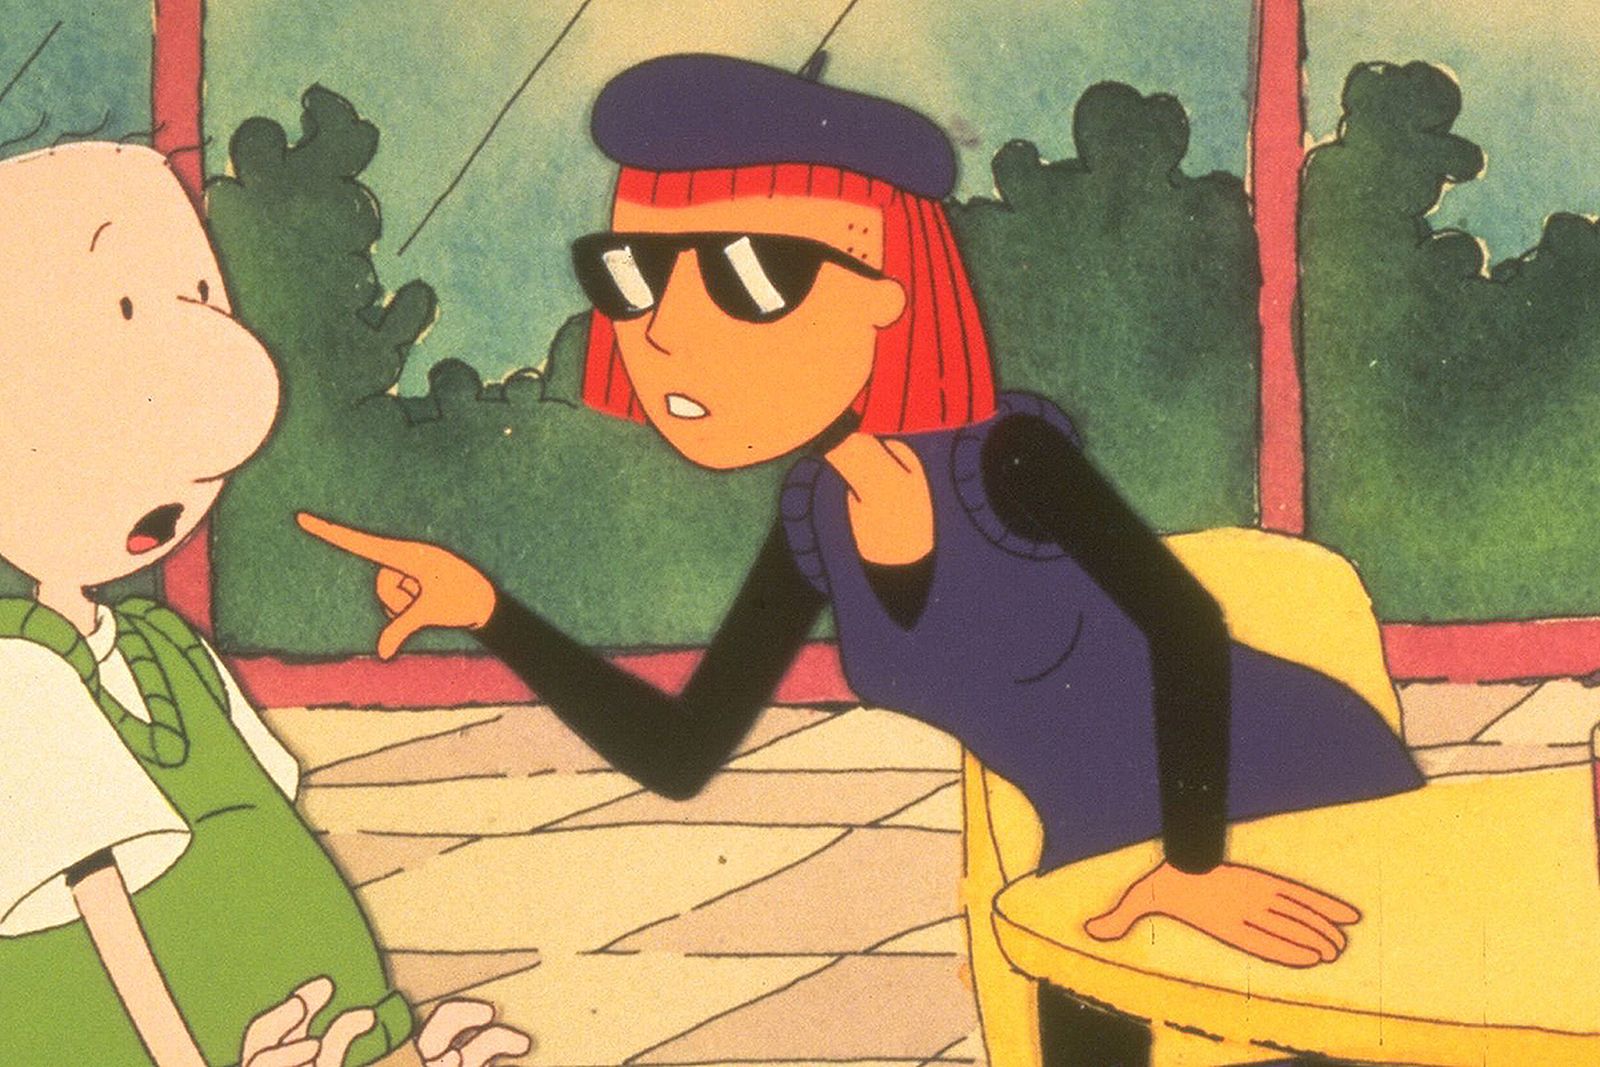 The 19 Best-Dressed '90s & '00s Cartoon Characters